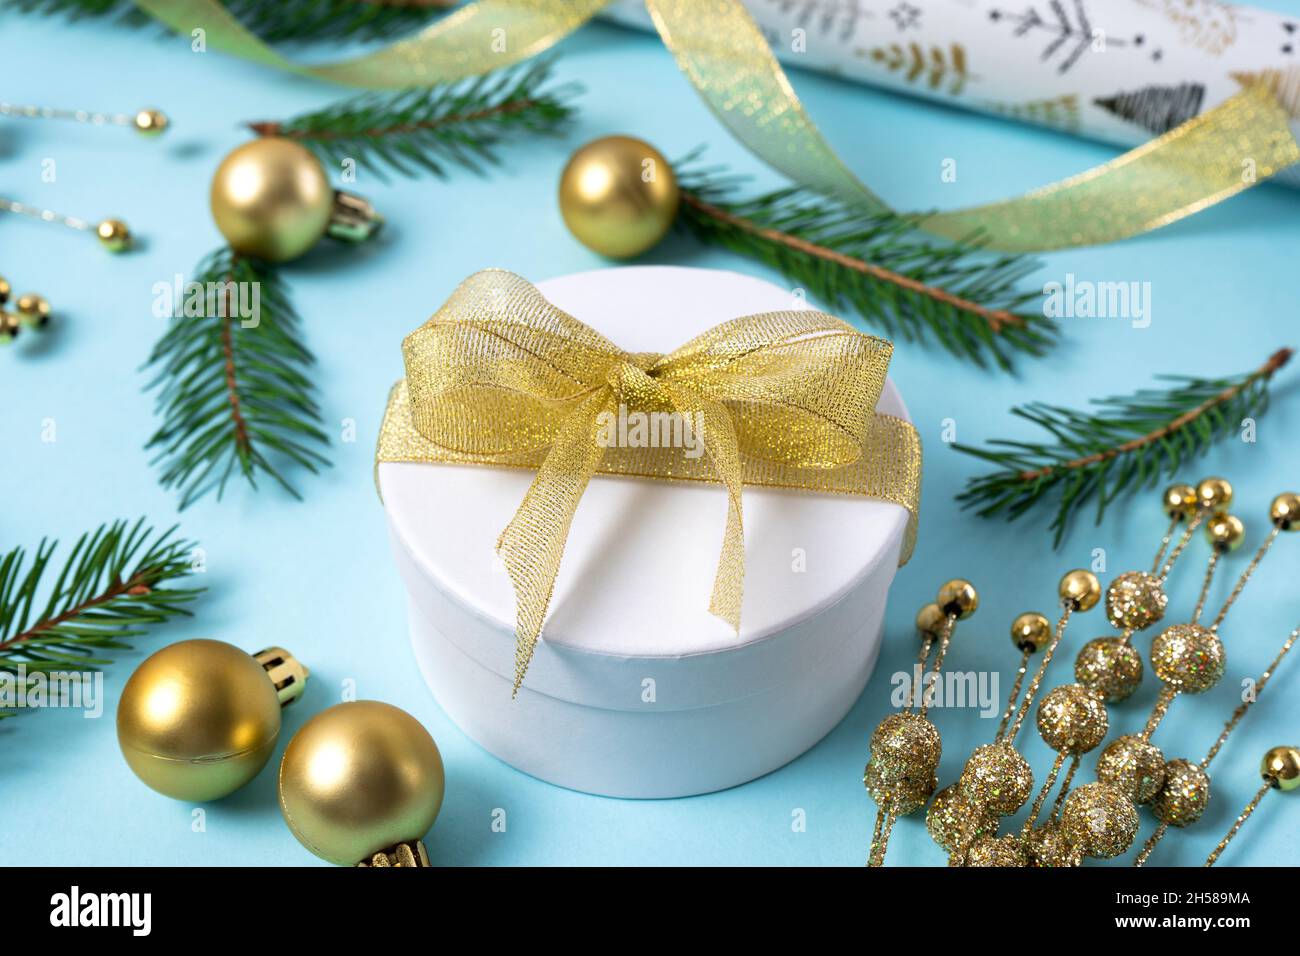 Gift box with gold ribbon. Christmas gold decorations on a light blue background. Holiday and celebration concept for postcard or invitation. Side vie Stock Photo